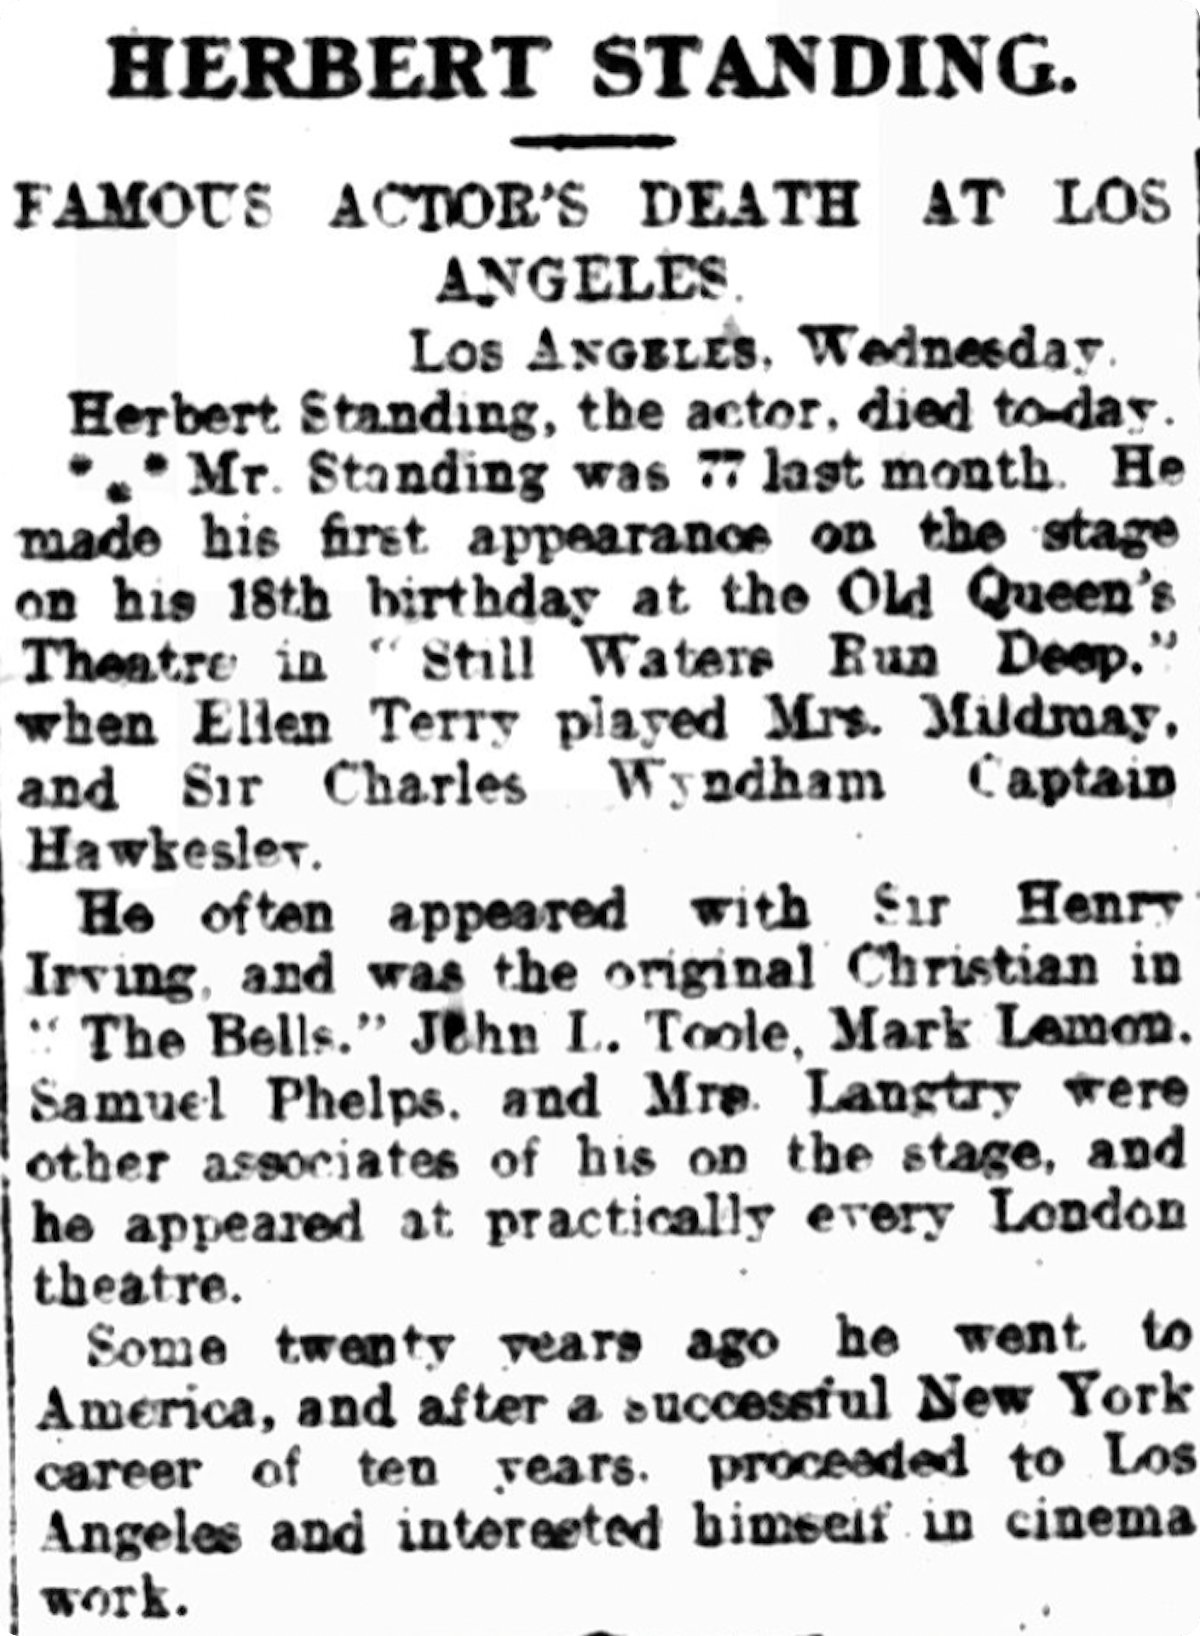 Newspaper announcing the death of the actor Herbert Standing in 1923.